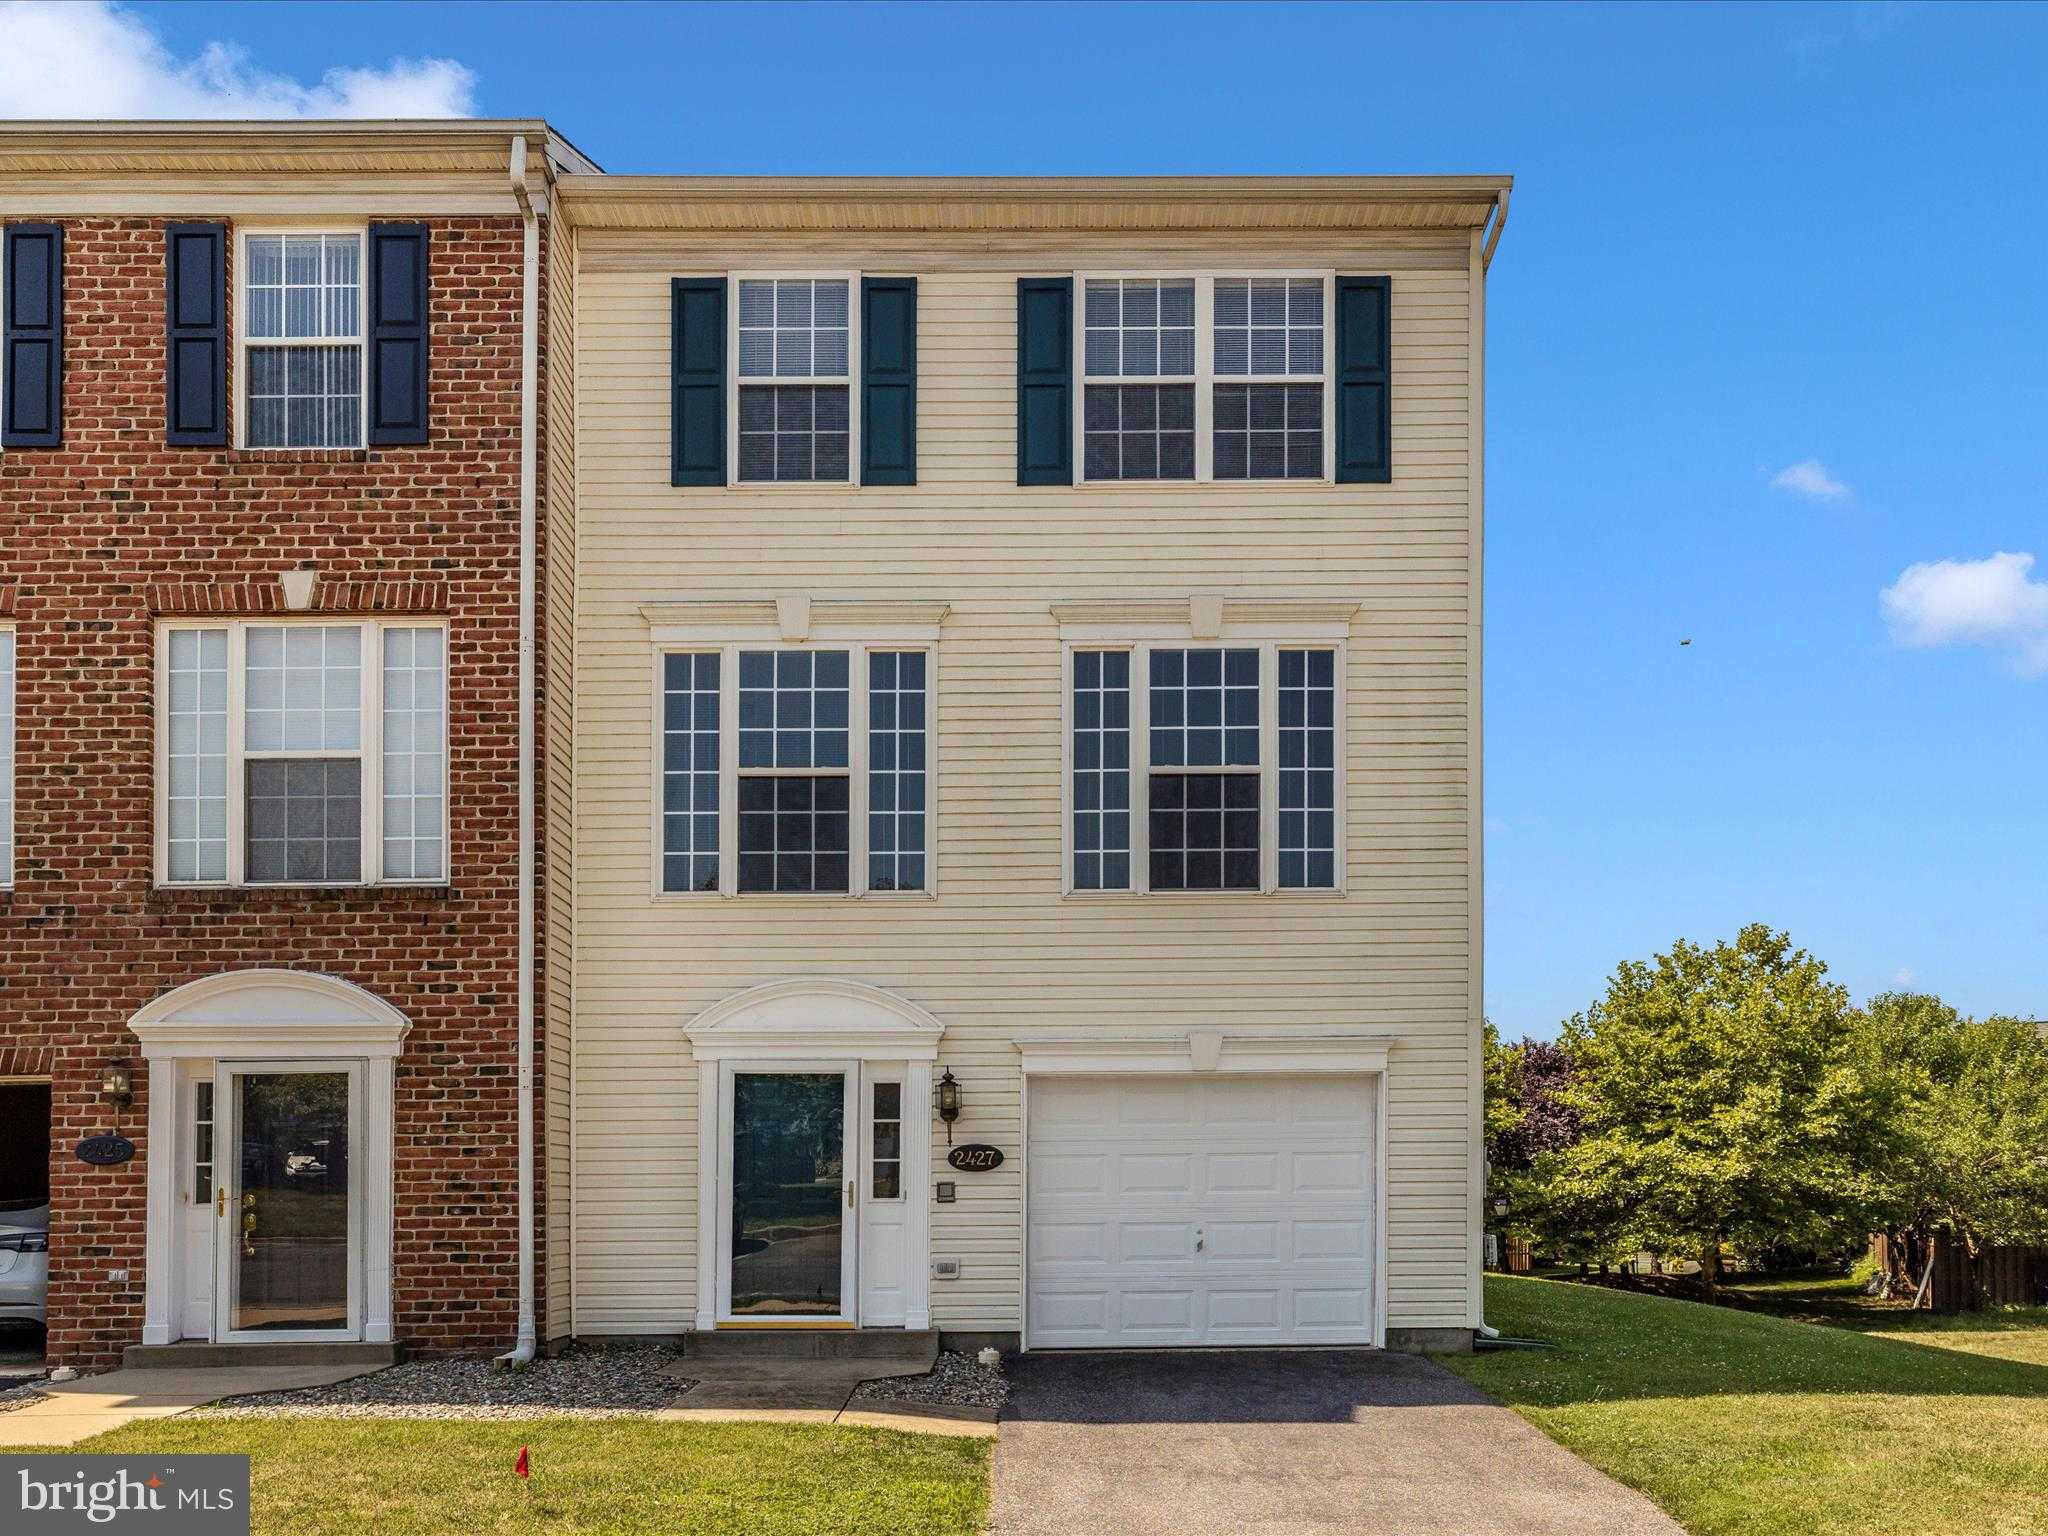 View FREDERICK, MD 21702 townhome